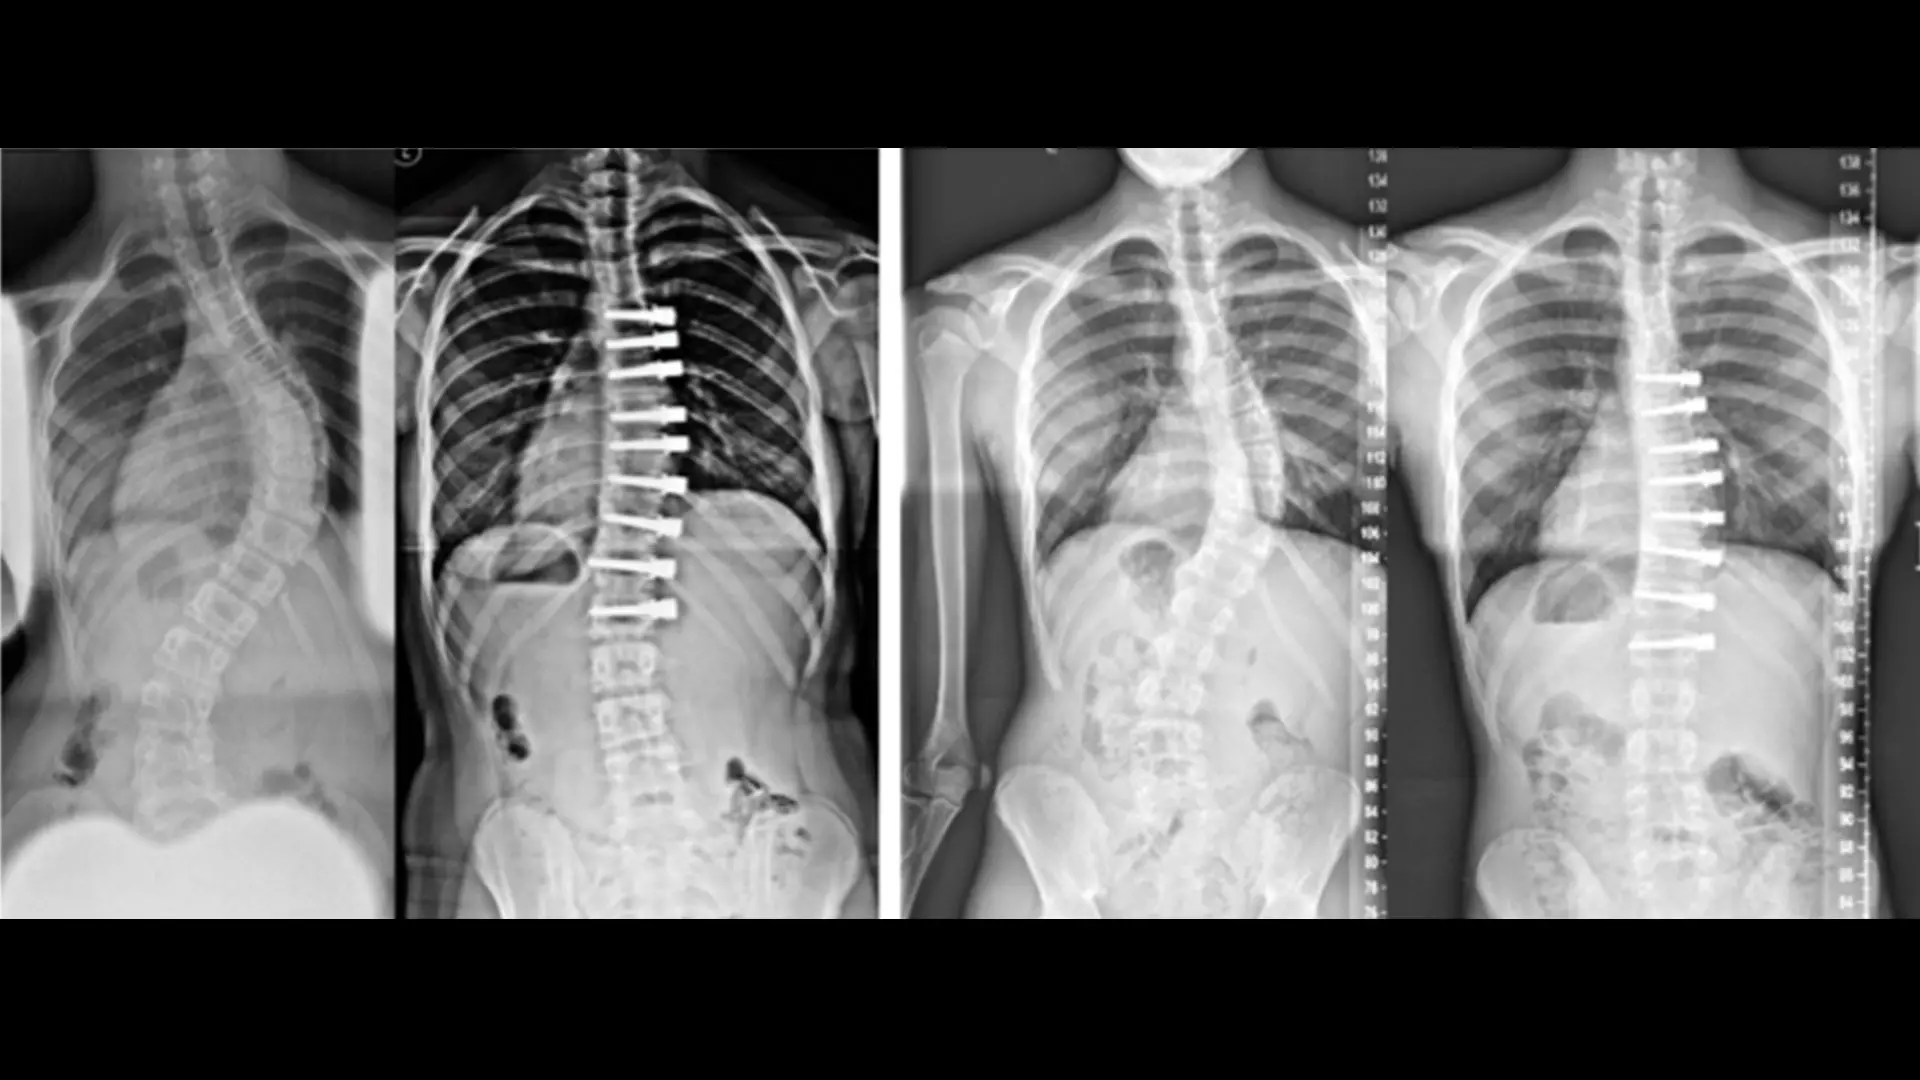 Images of two patients who were treated using the Zimmer Biomet Spine, the Tether™ Vertebral Body Tethering System 

